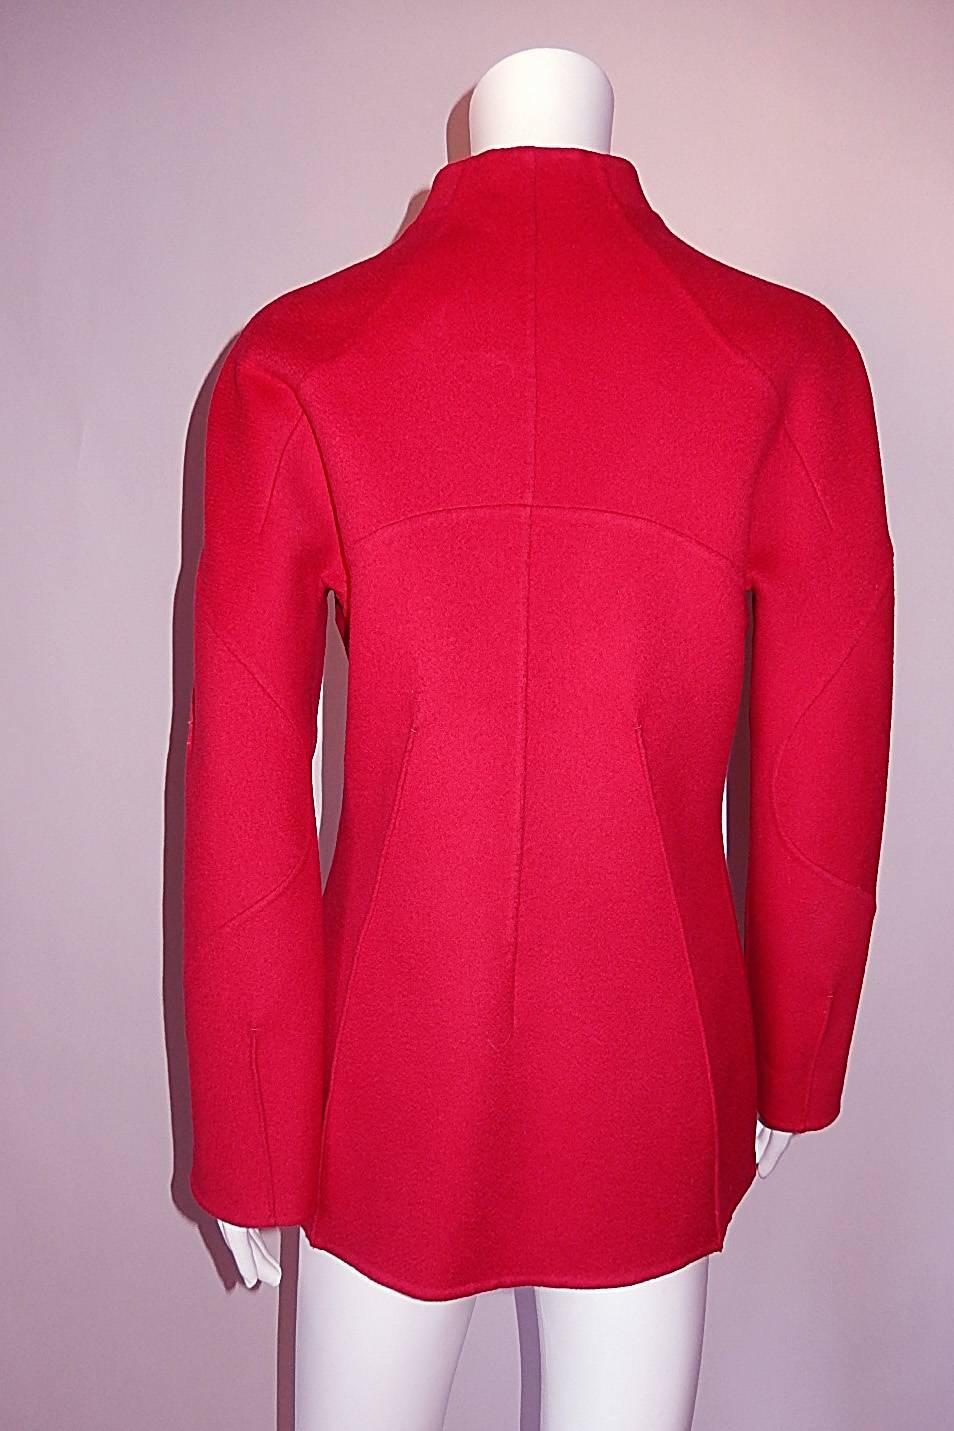 Chado Ralph Rucci 100% Cashmere Red/Raspberry Jacket Size 6 For Sale 1